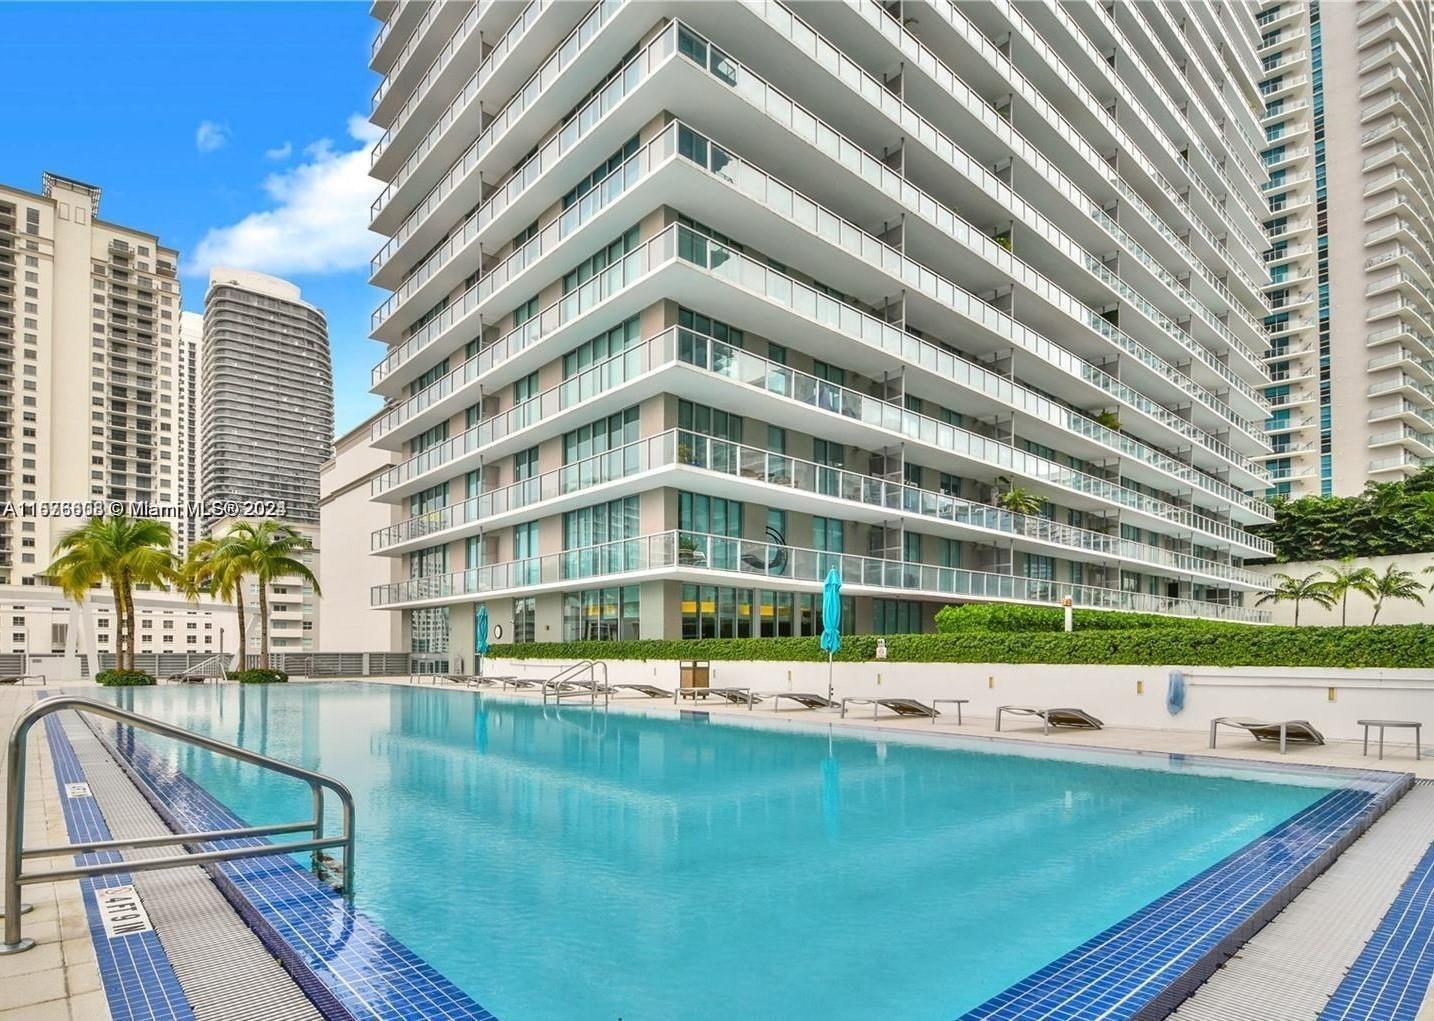 BEST LOCATION!! FULLY FURNISHED ONE BEDROOM UNIT. Stainless Steel appliances. Floor to ceiling glass and wide balconies. 2 Pools, Gym, steam room, Media Room, Management on site, Playroom, BBQ area, Valet, 24/7 Security and Concierge. Steps to Mary Brickell Village, walking distance to everything. Metrorail, Restaurants, Brickell City Centre. One parking space assigned. Easy to show. - Short term rental. Live where you love and love where you live!